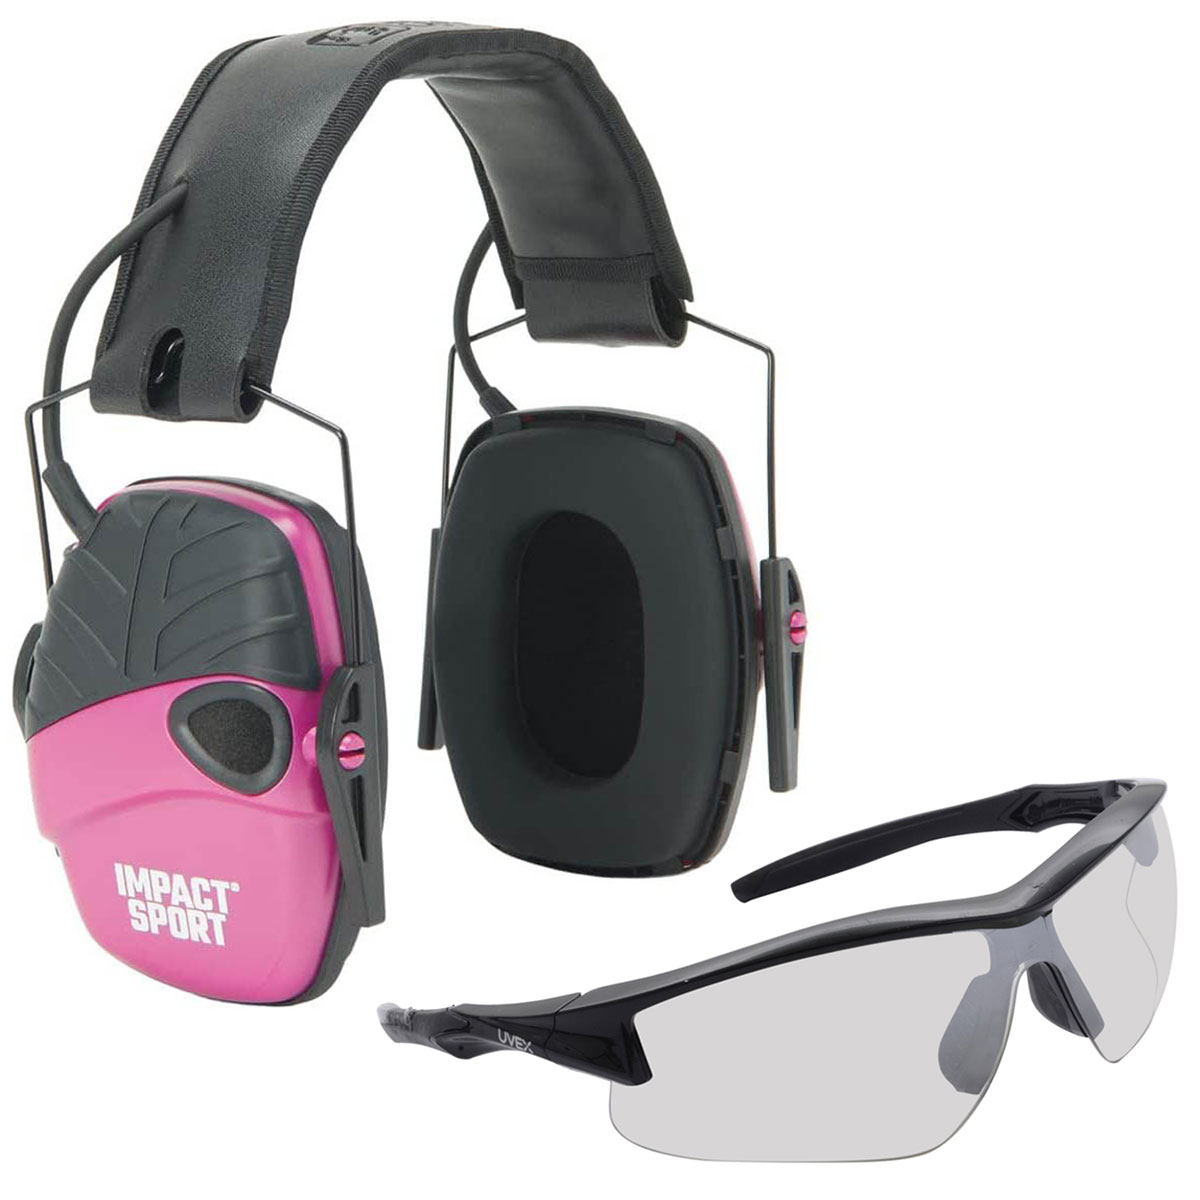 Howard Leight Women's Safety Ear and Eye Protection for Shooting Bundle